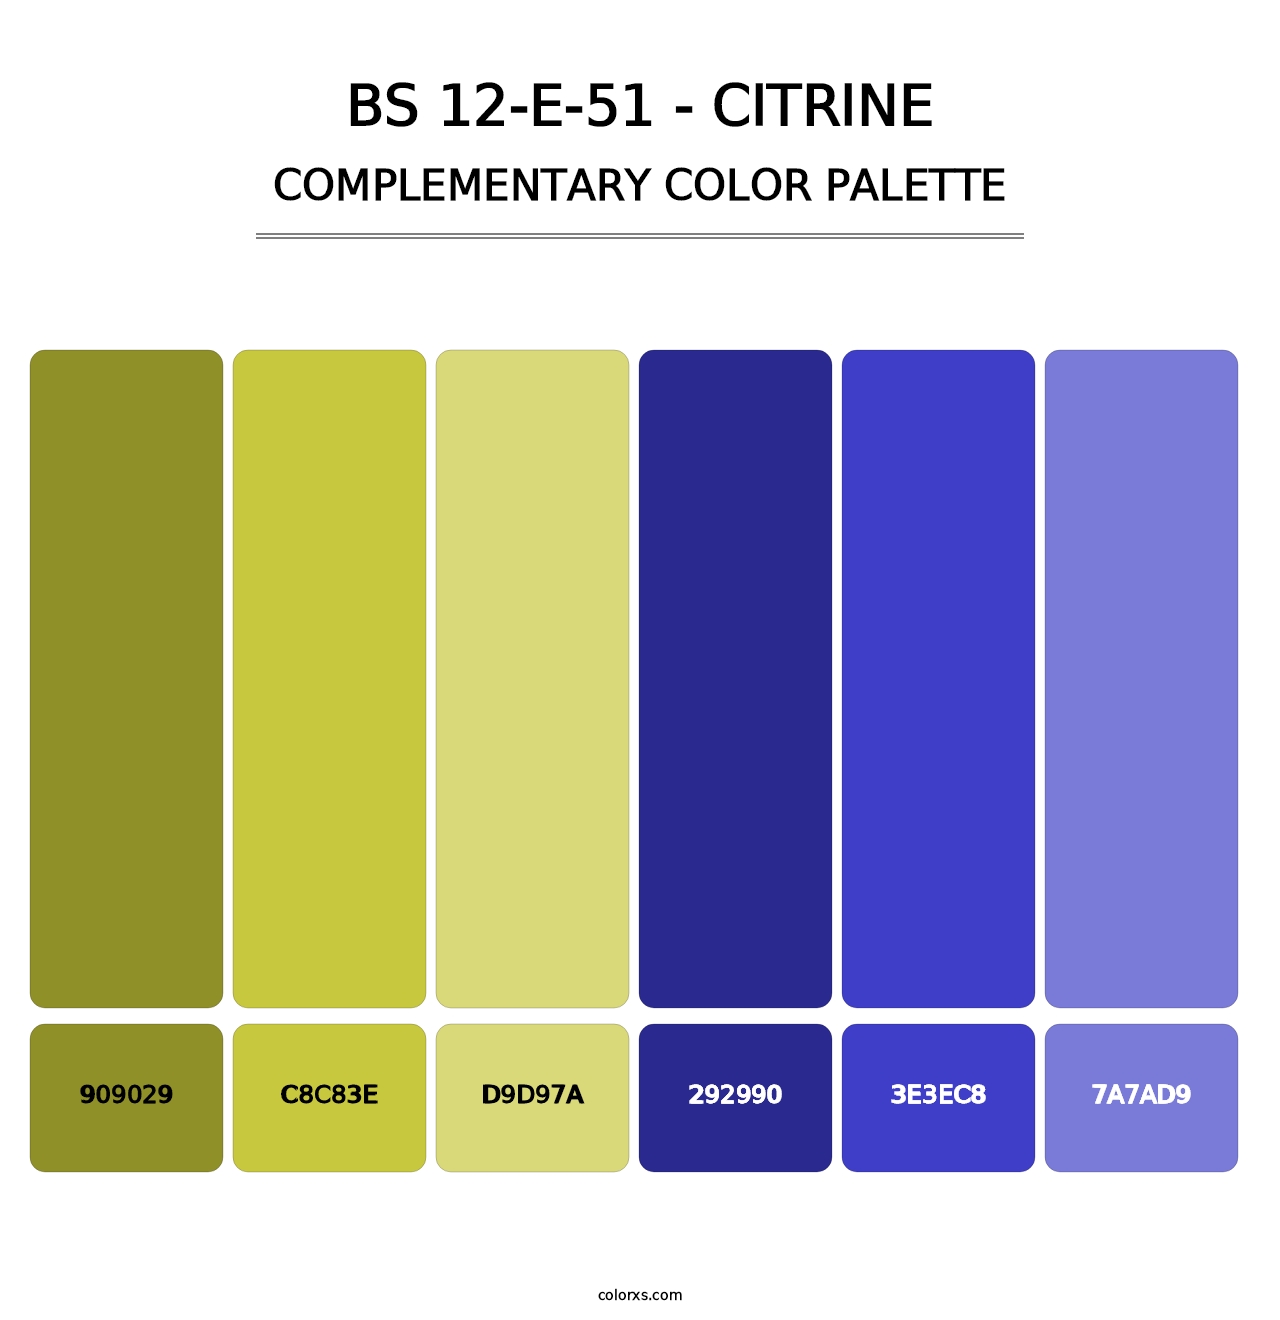 BS 12-E-51 - Citrine - Complementary Color Palette